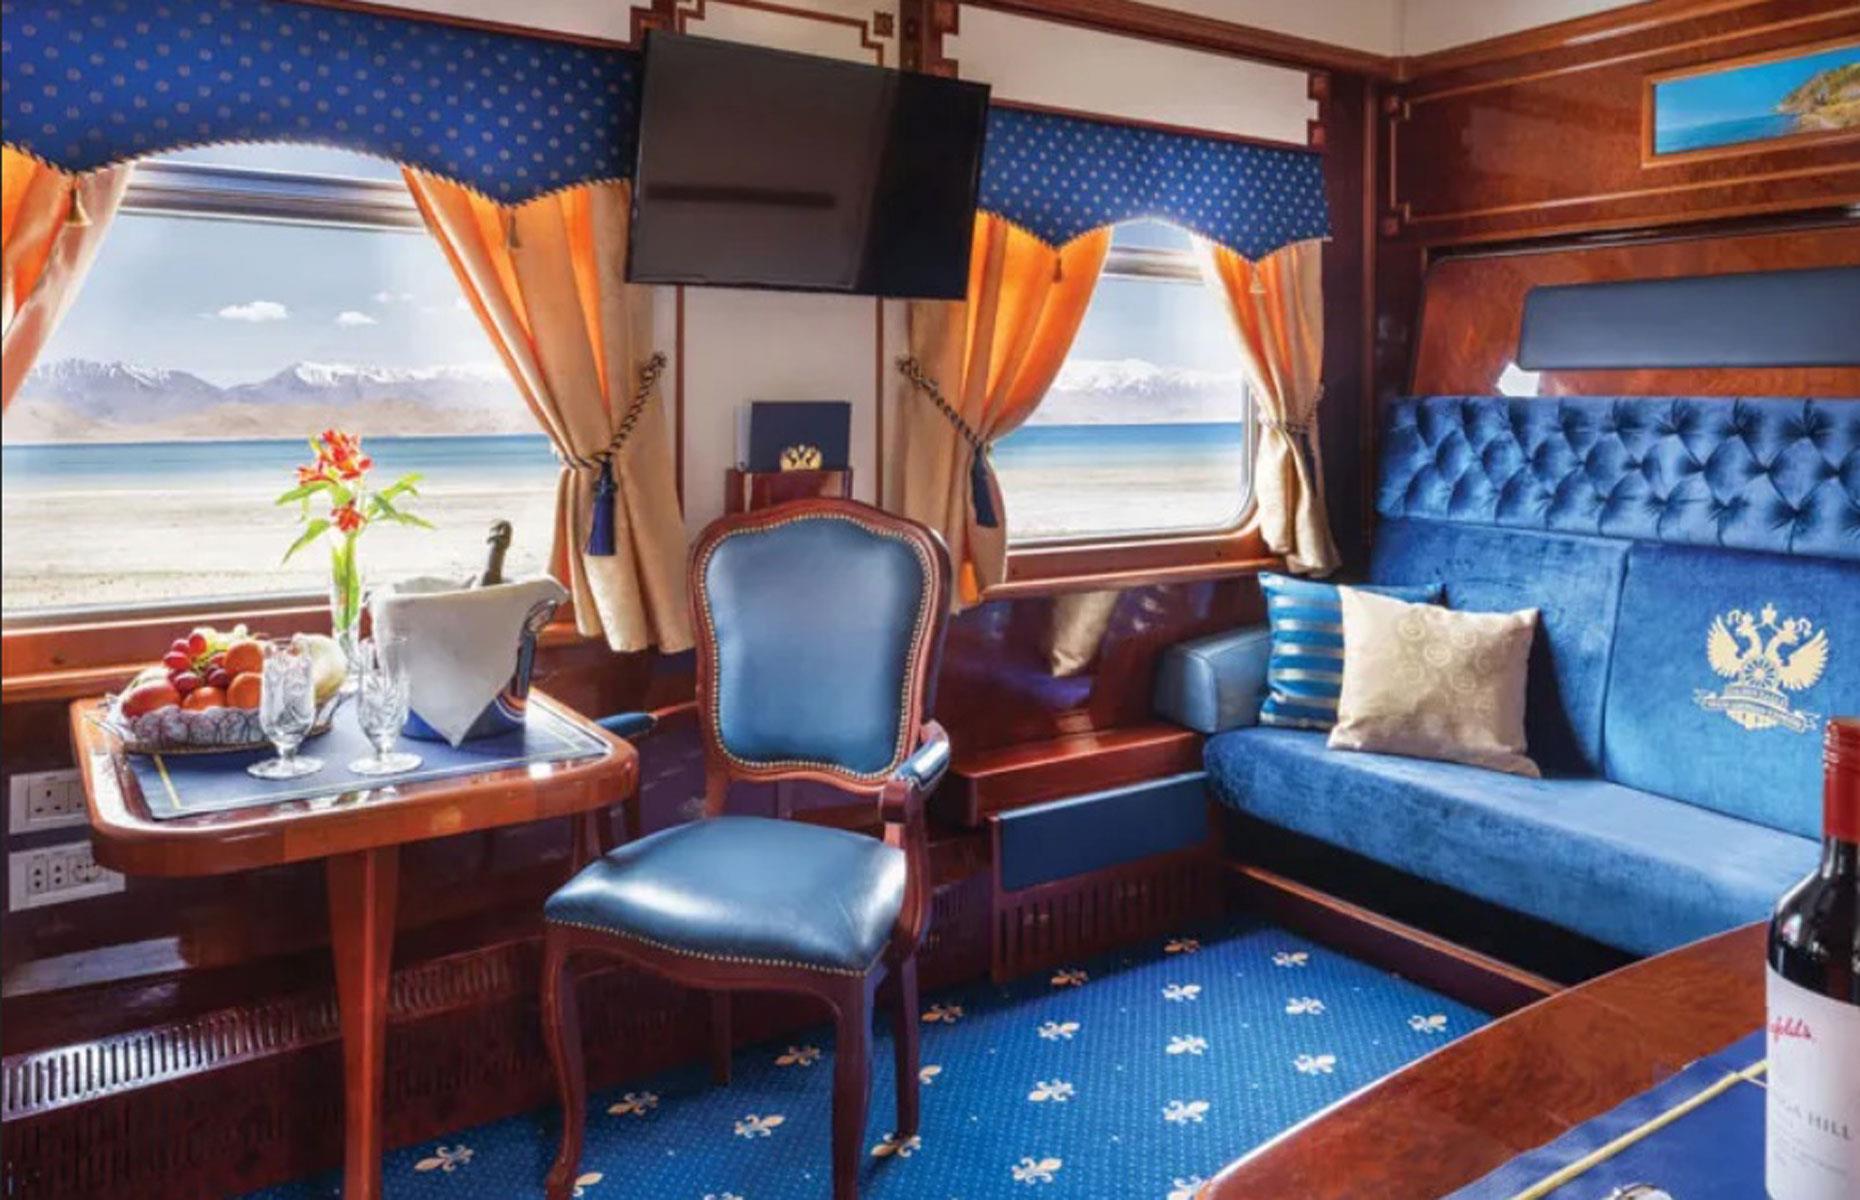 <p>The 14-day, 13-night Republic of the Silk Road tour, which travels through the "Five Stans" (Uzbekistan, Tajikistan, Kazakhstan, Kyrgyzstan, and Turkmenistan), is the train's most expensive trip.</p>  <p>For this journey, the Imperial Suite option – which offers passengers 120 square feet (11 square metres) of floor space, a king-sized bed, a lounge area, and a bathroom – is priced at $52,495 (£41,305) per person based on two sharing, or $103,895 (£81,749) for single occupancy. That's $4,038 (£3,177) and $7,992 (£6,288) respectively per night.</p>